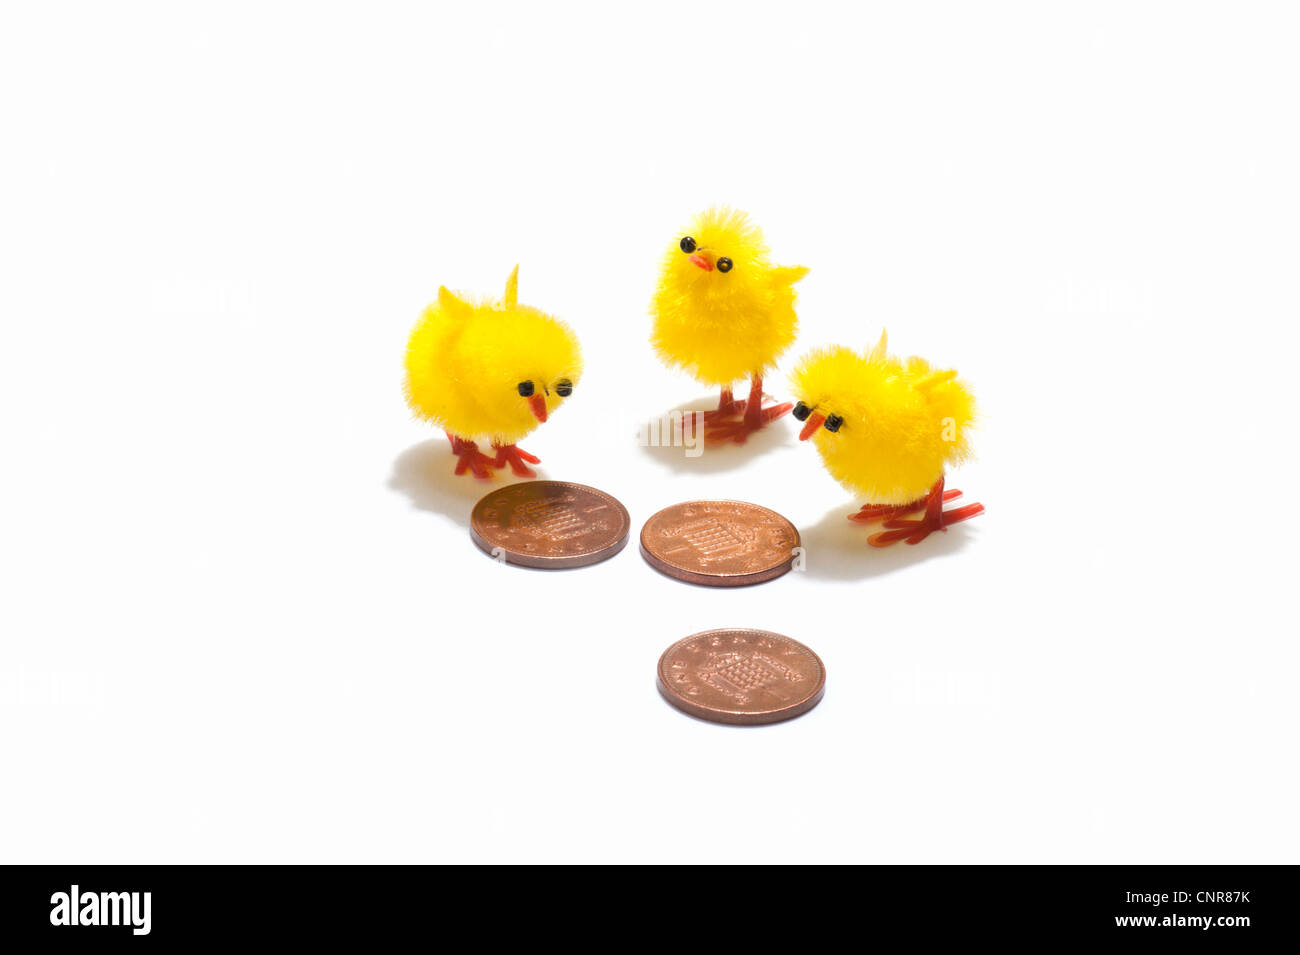 Three Easter chick decorations looking at penny coins Stock Photo